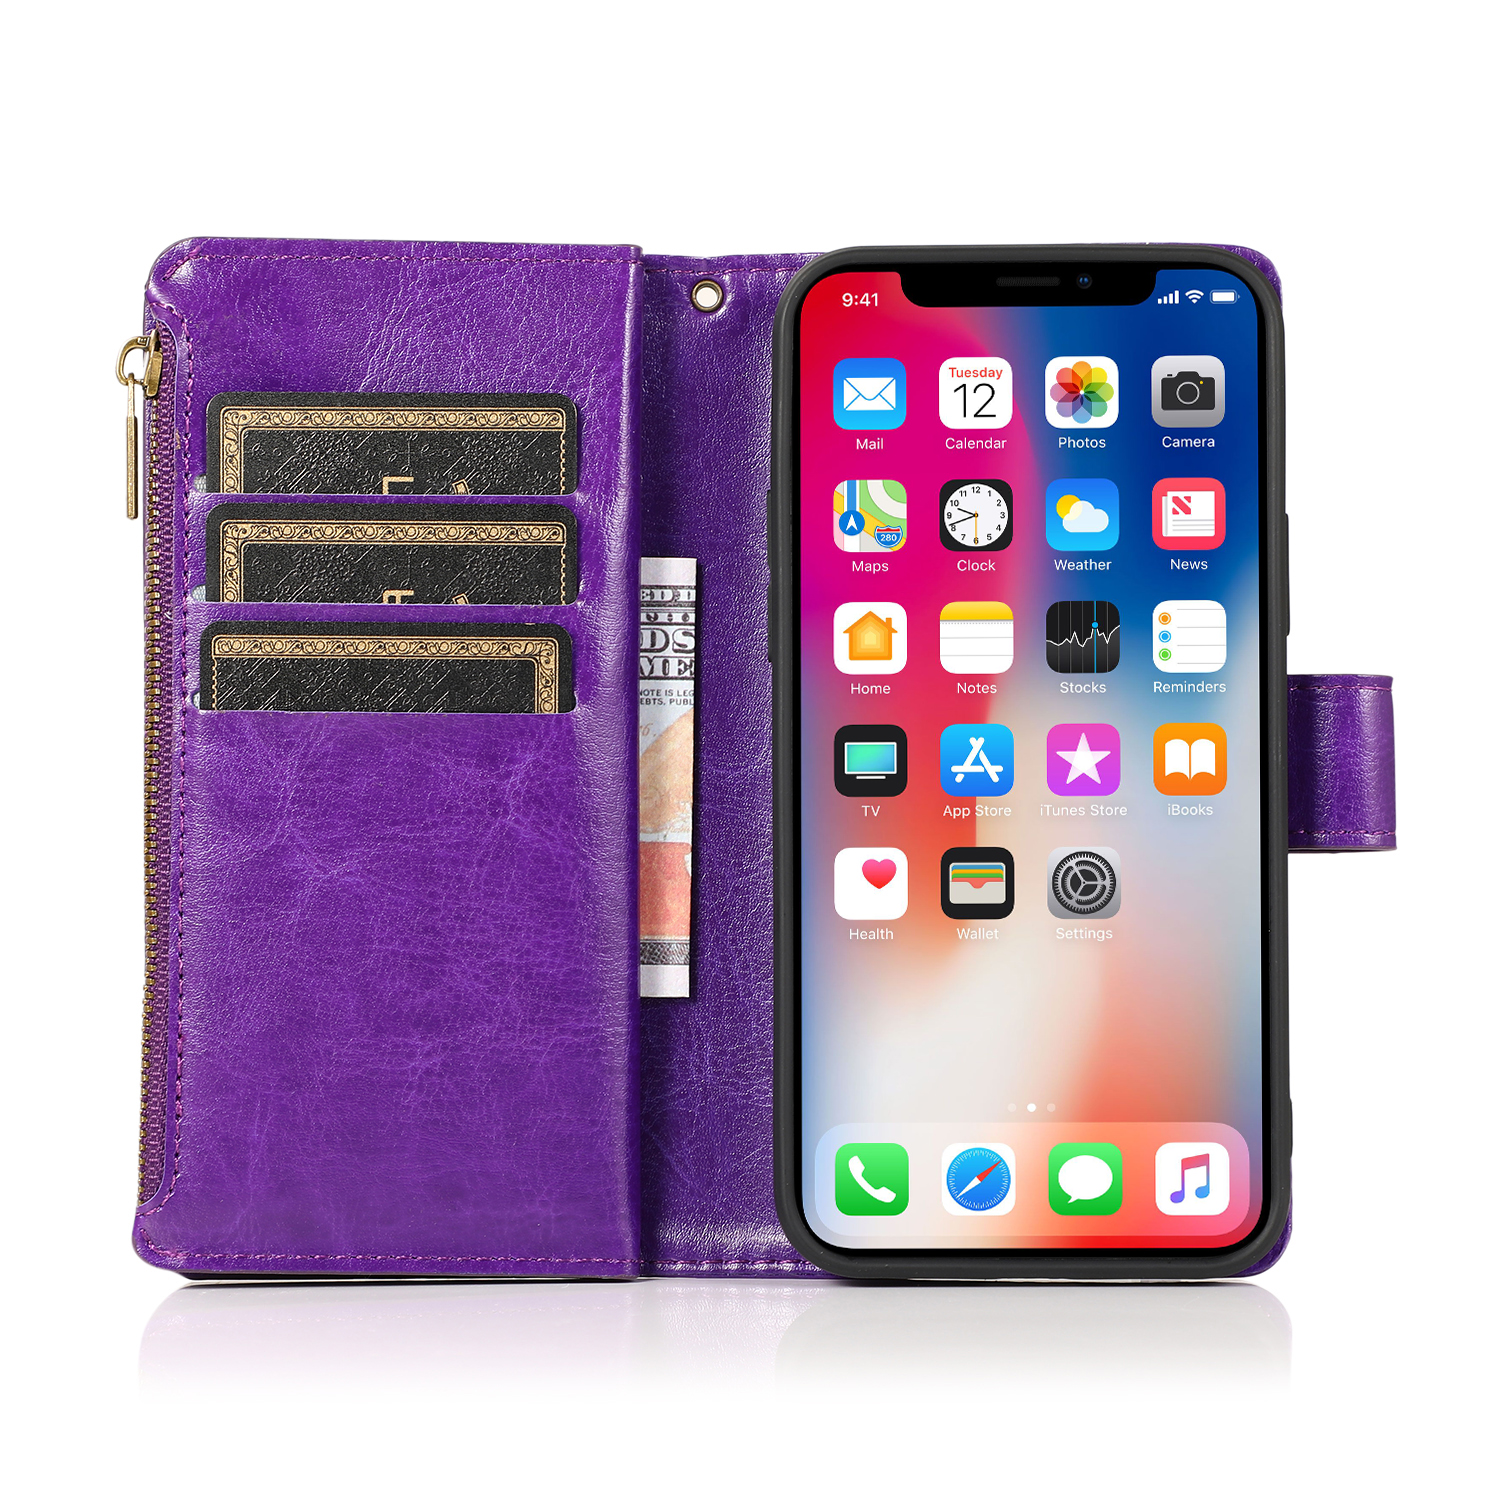 for Samsung Galaxy S21 Ultra (6.8") Leather Zipper Wallet Case 9 Credit Card Slots Cash Money Pocket Clutch Pouch Stand & Strap Cover ,Xpm Phone Case [Purple] - image 2 of 8